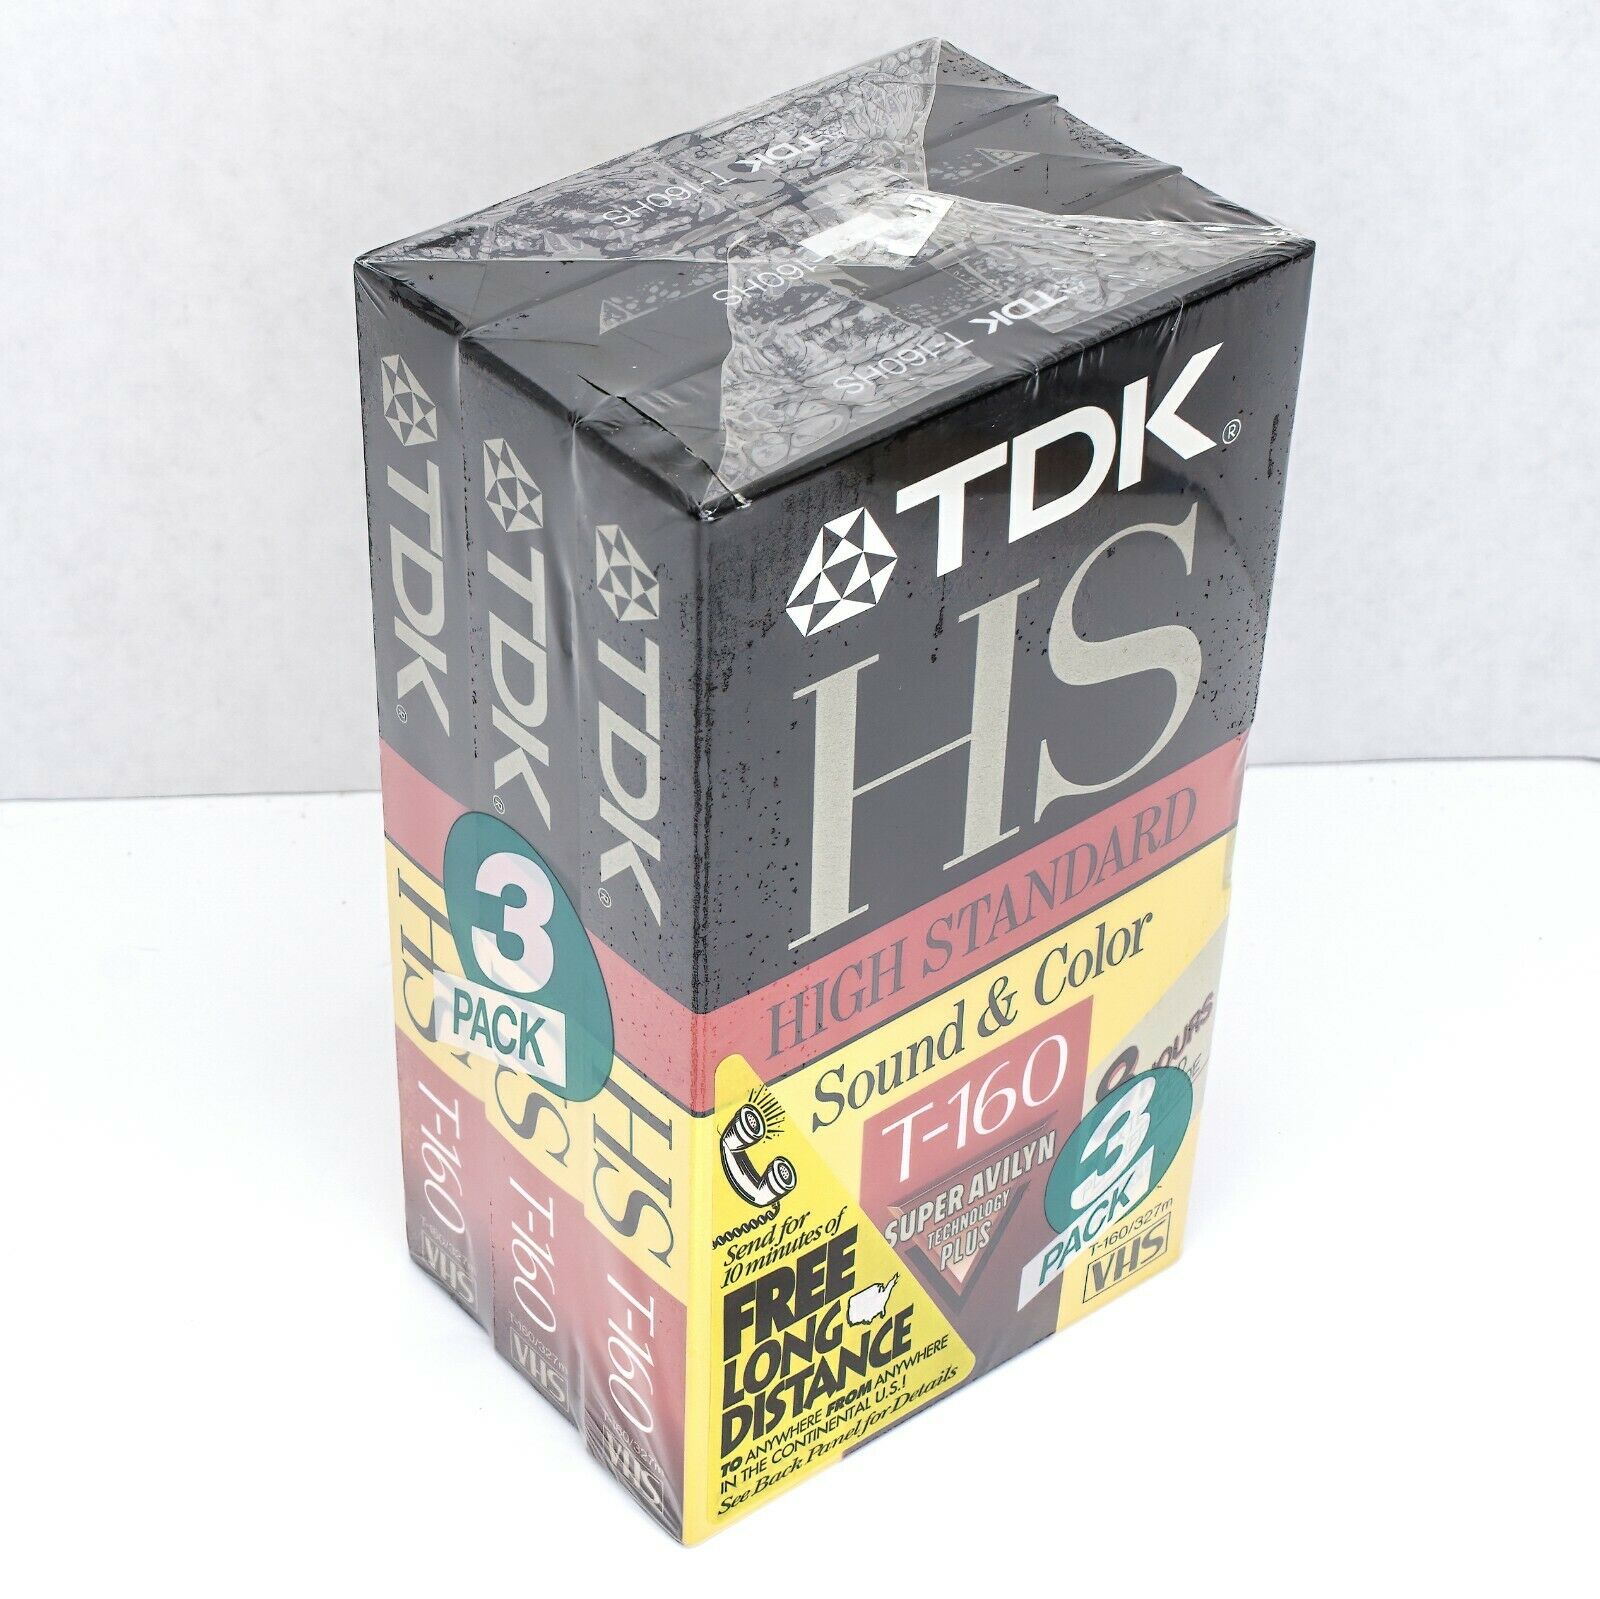 Tdk T-160 8 Hour Vhs Blank Recordable Video Cassette Tape 3-pack Factory Sealed